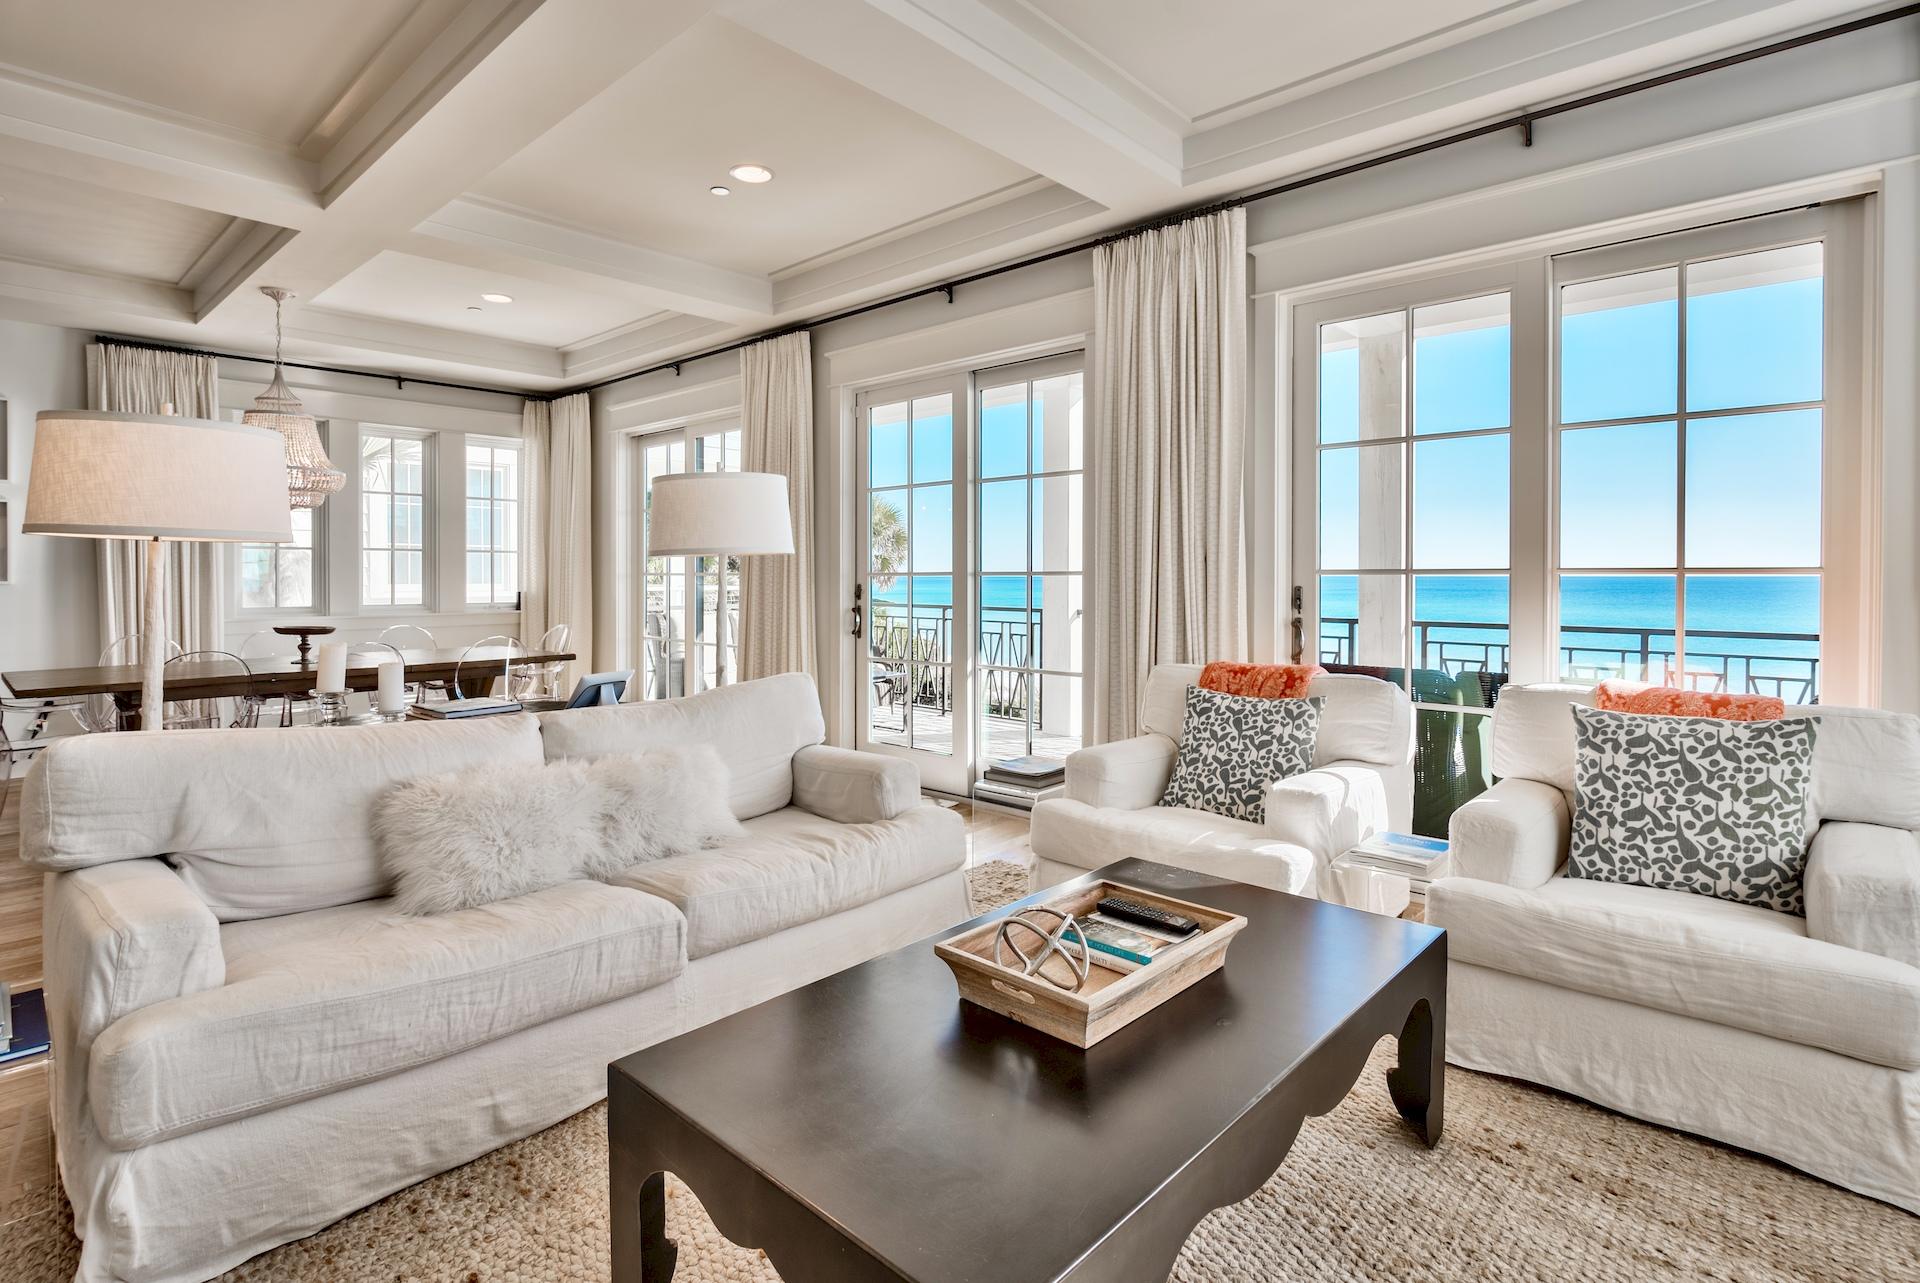 Gulf Front Luxury Beach Home on 30A